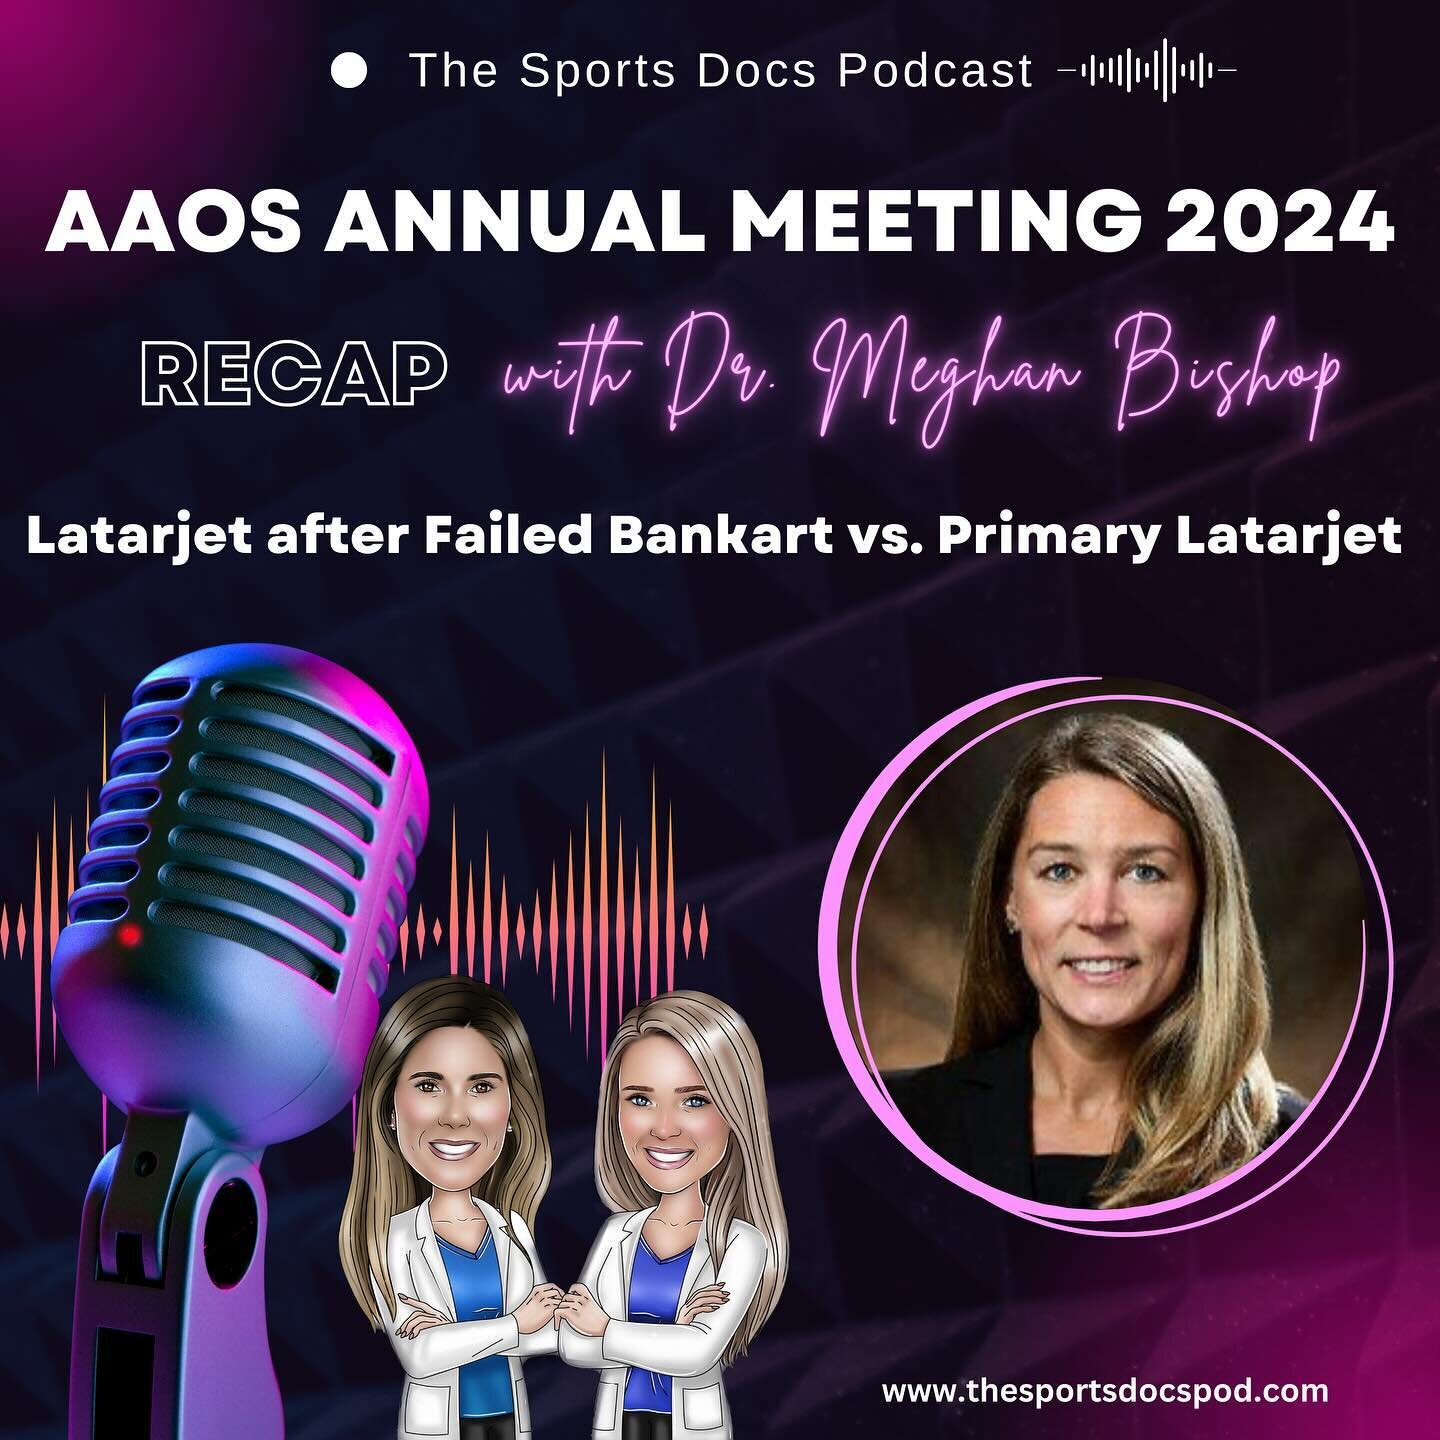 ✨ NEW episode is LIVE! ✨

We&rsquo;re continuing with our special series of episodes to recap the newest research presented at the American Academy of Orthopaedic Surgeons Annual Meeting held last month in San Francisco.

Were joined again by Dr. Meg